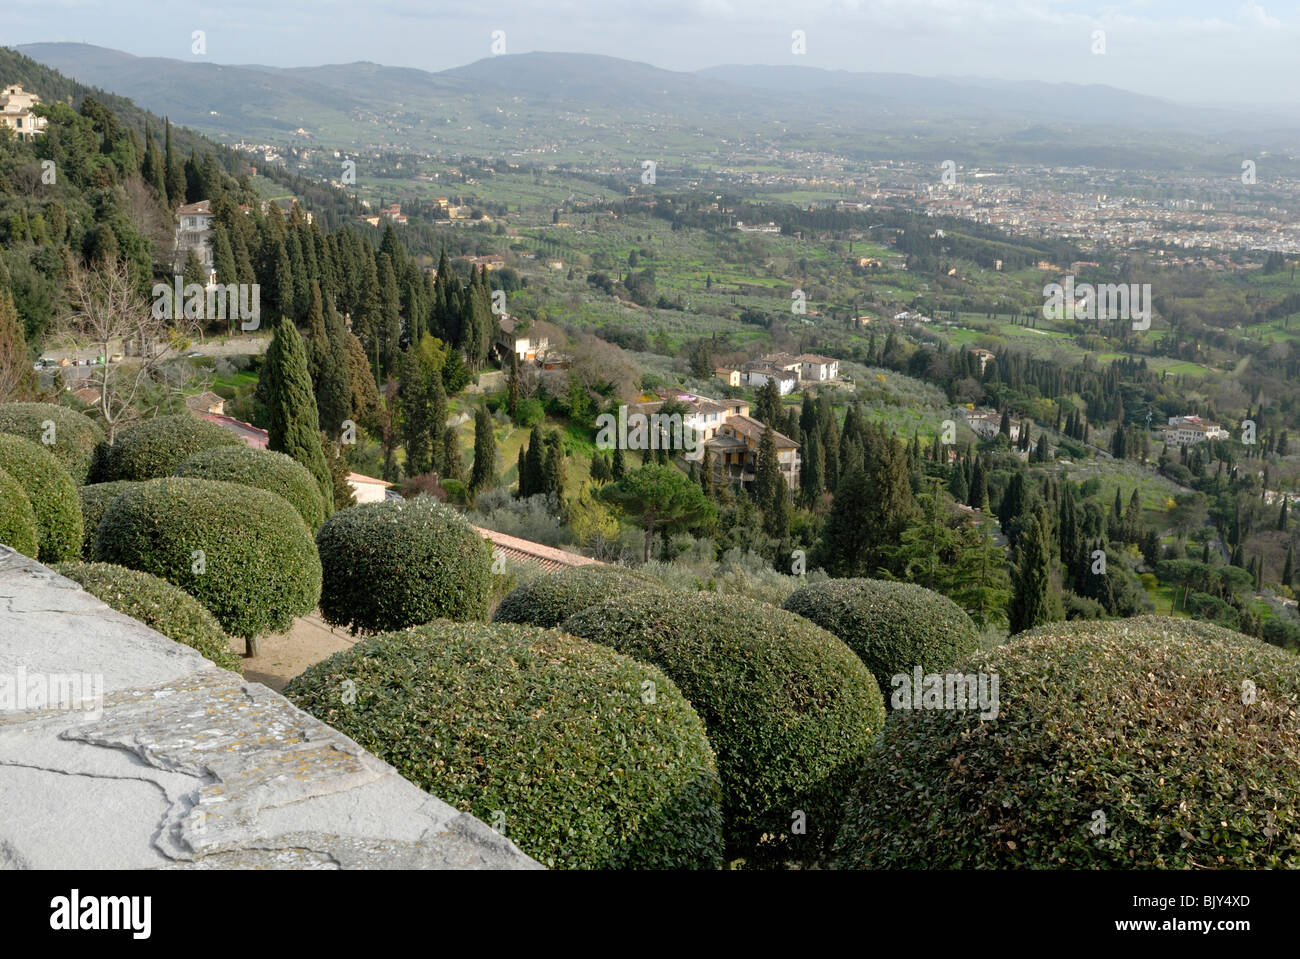 A spectacular view of the plain and Florence below Fiesole from Via di San Francesco. Fiesole, Tuscany, Italy, Europe. Stock Photo